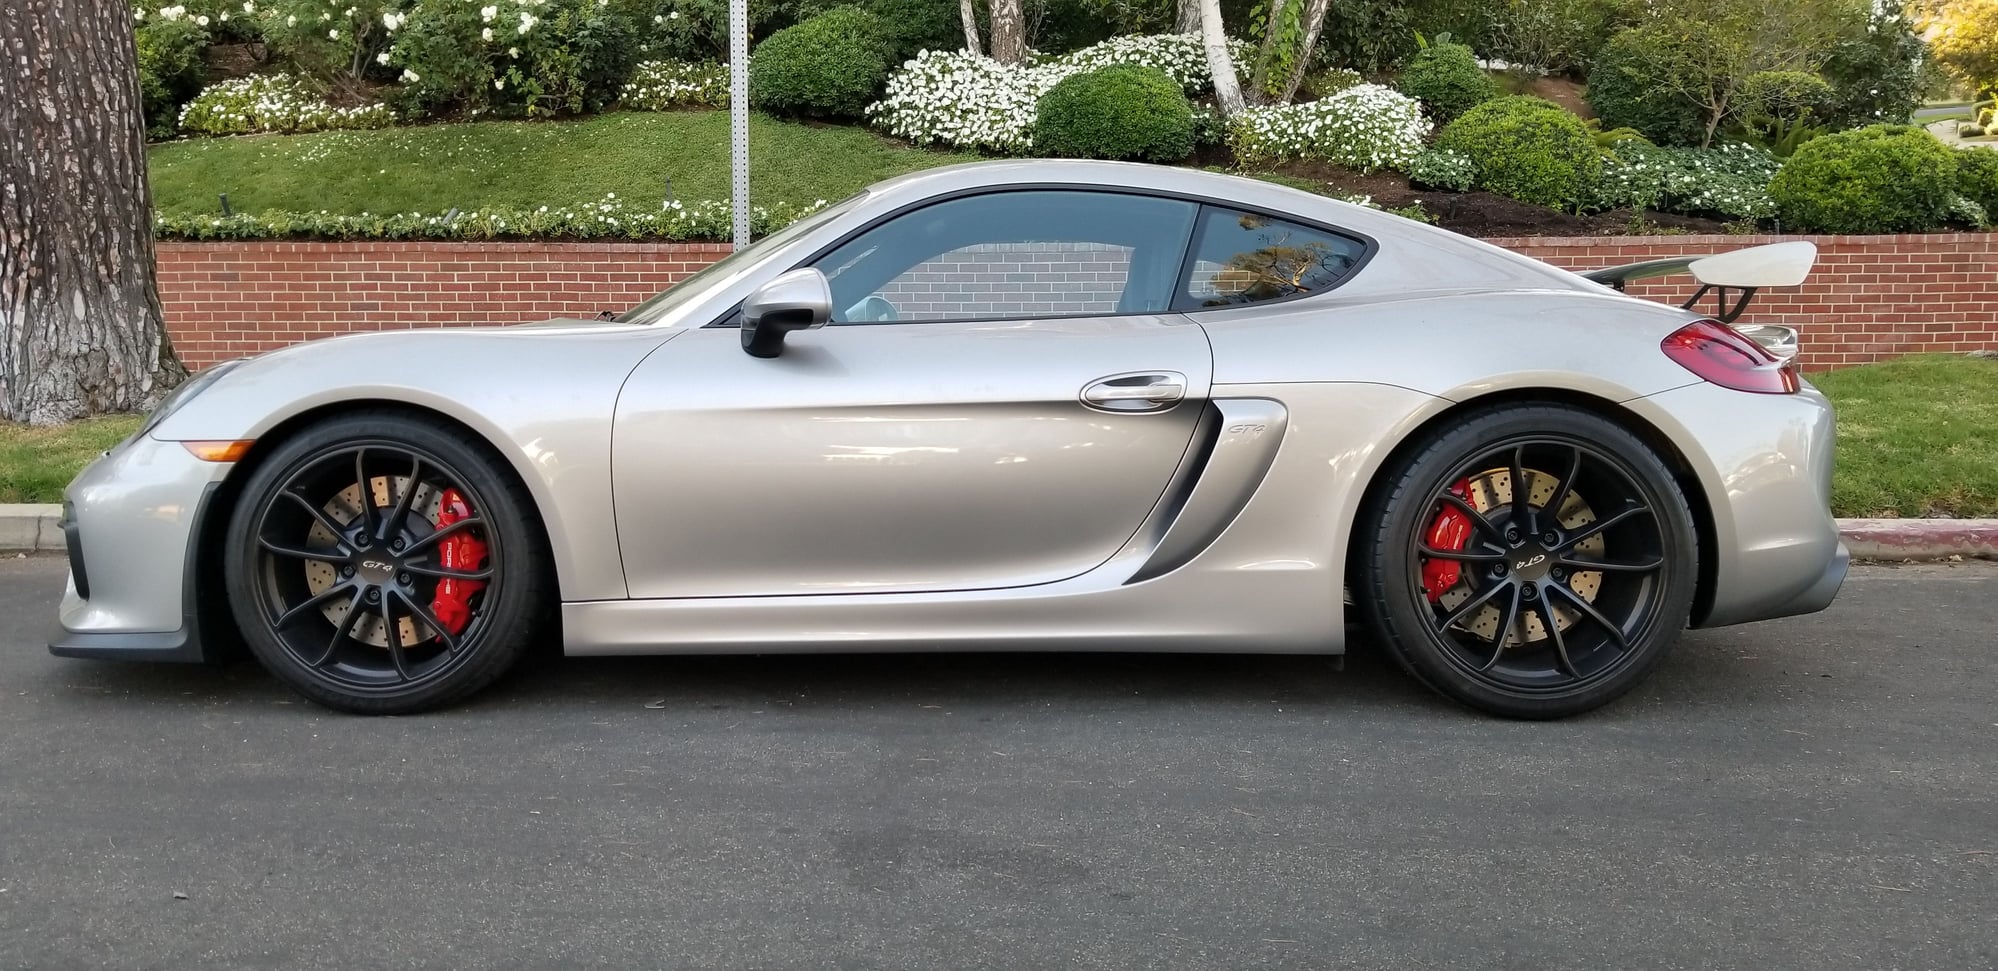 2016 Porsche Cayman GT4 - 2016 Porsche GT4 - 743 Miles, MINT Condition, GT Silver, LWBs - Used - VIN WP0AC2A80GK191932 - 743 Miles - 6 cyl - 2WD - Manual - Coupe - Silver - Los Angeles, CA 90049, United States